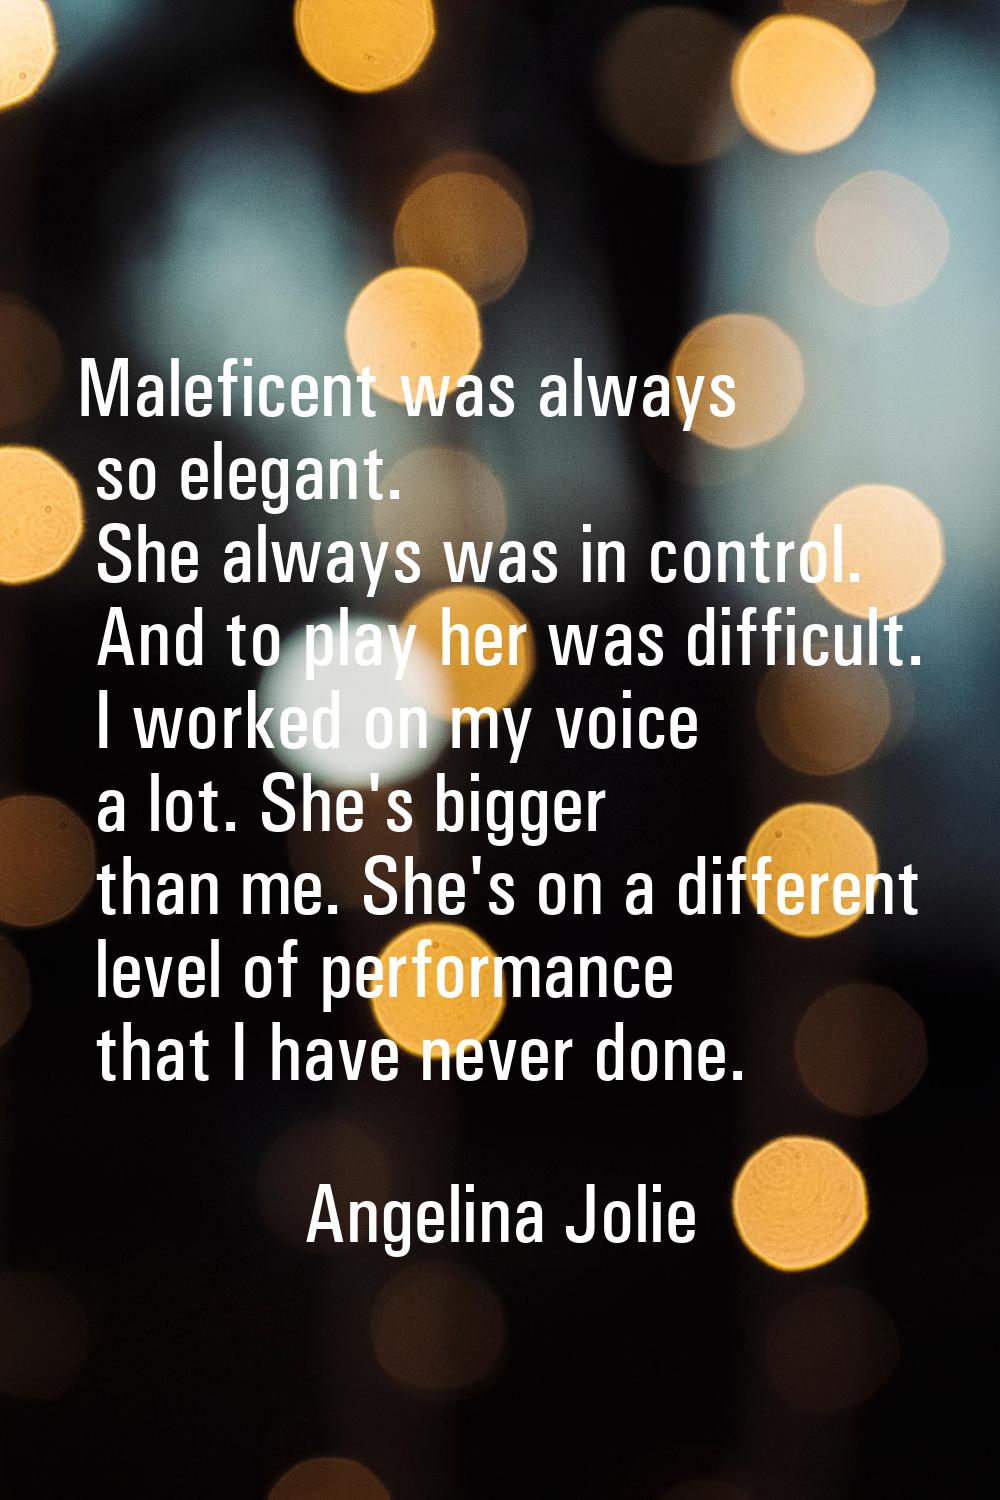 Maleficent was always so elegant. She always was in control. And to play her was difficult. I worke